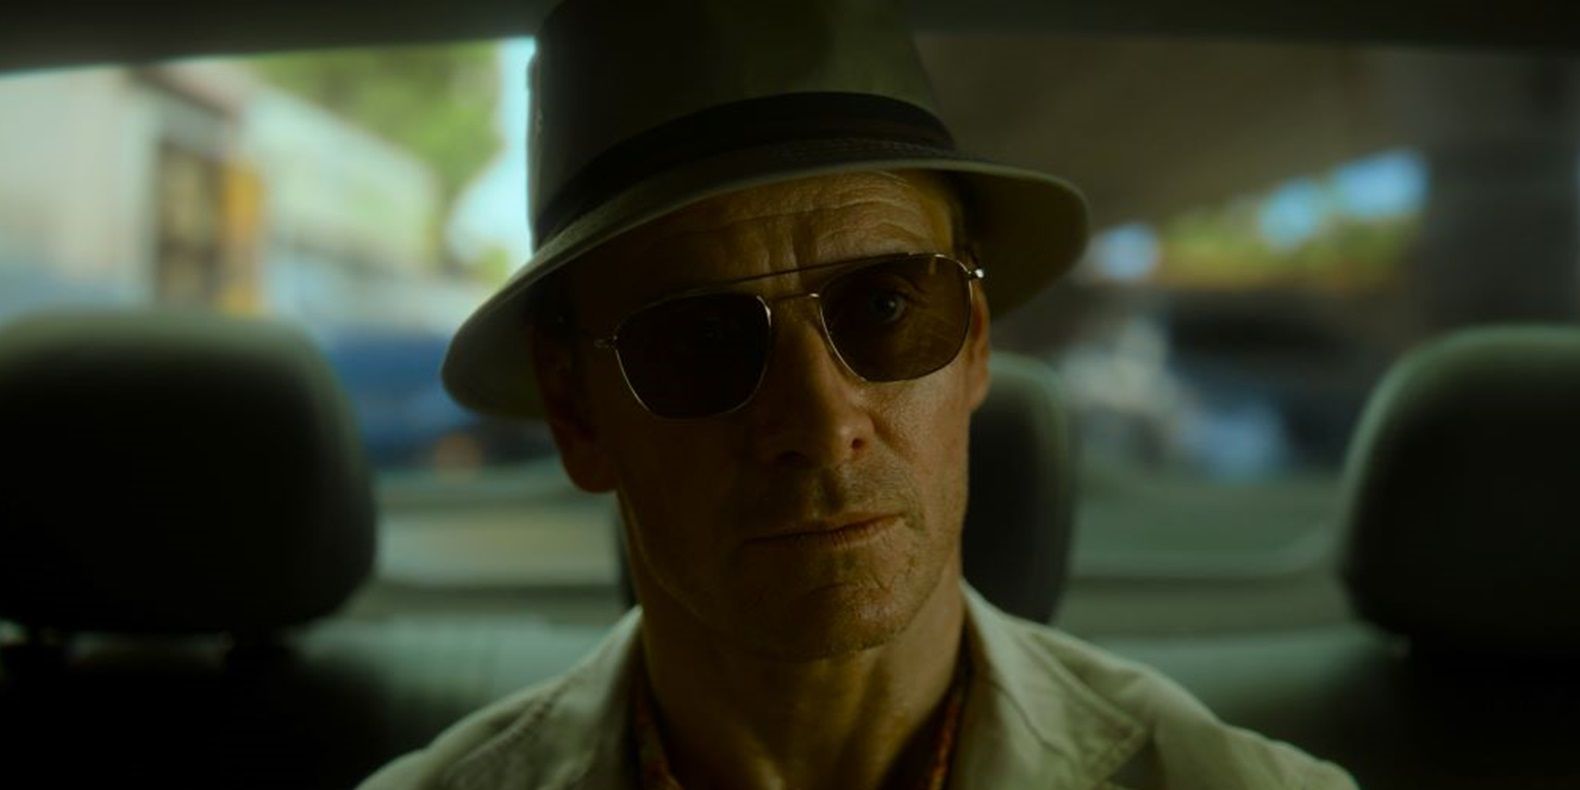 Michael Fassbender sits in a taxi in The Killer